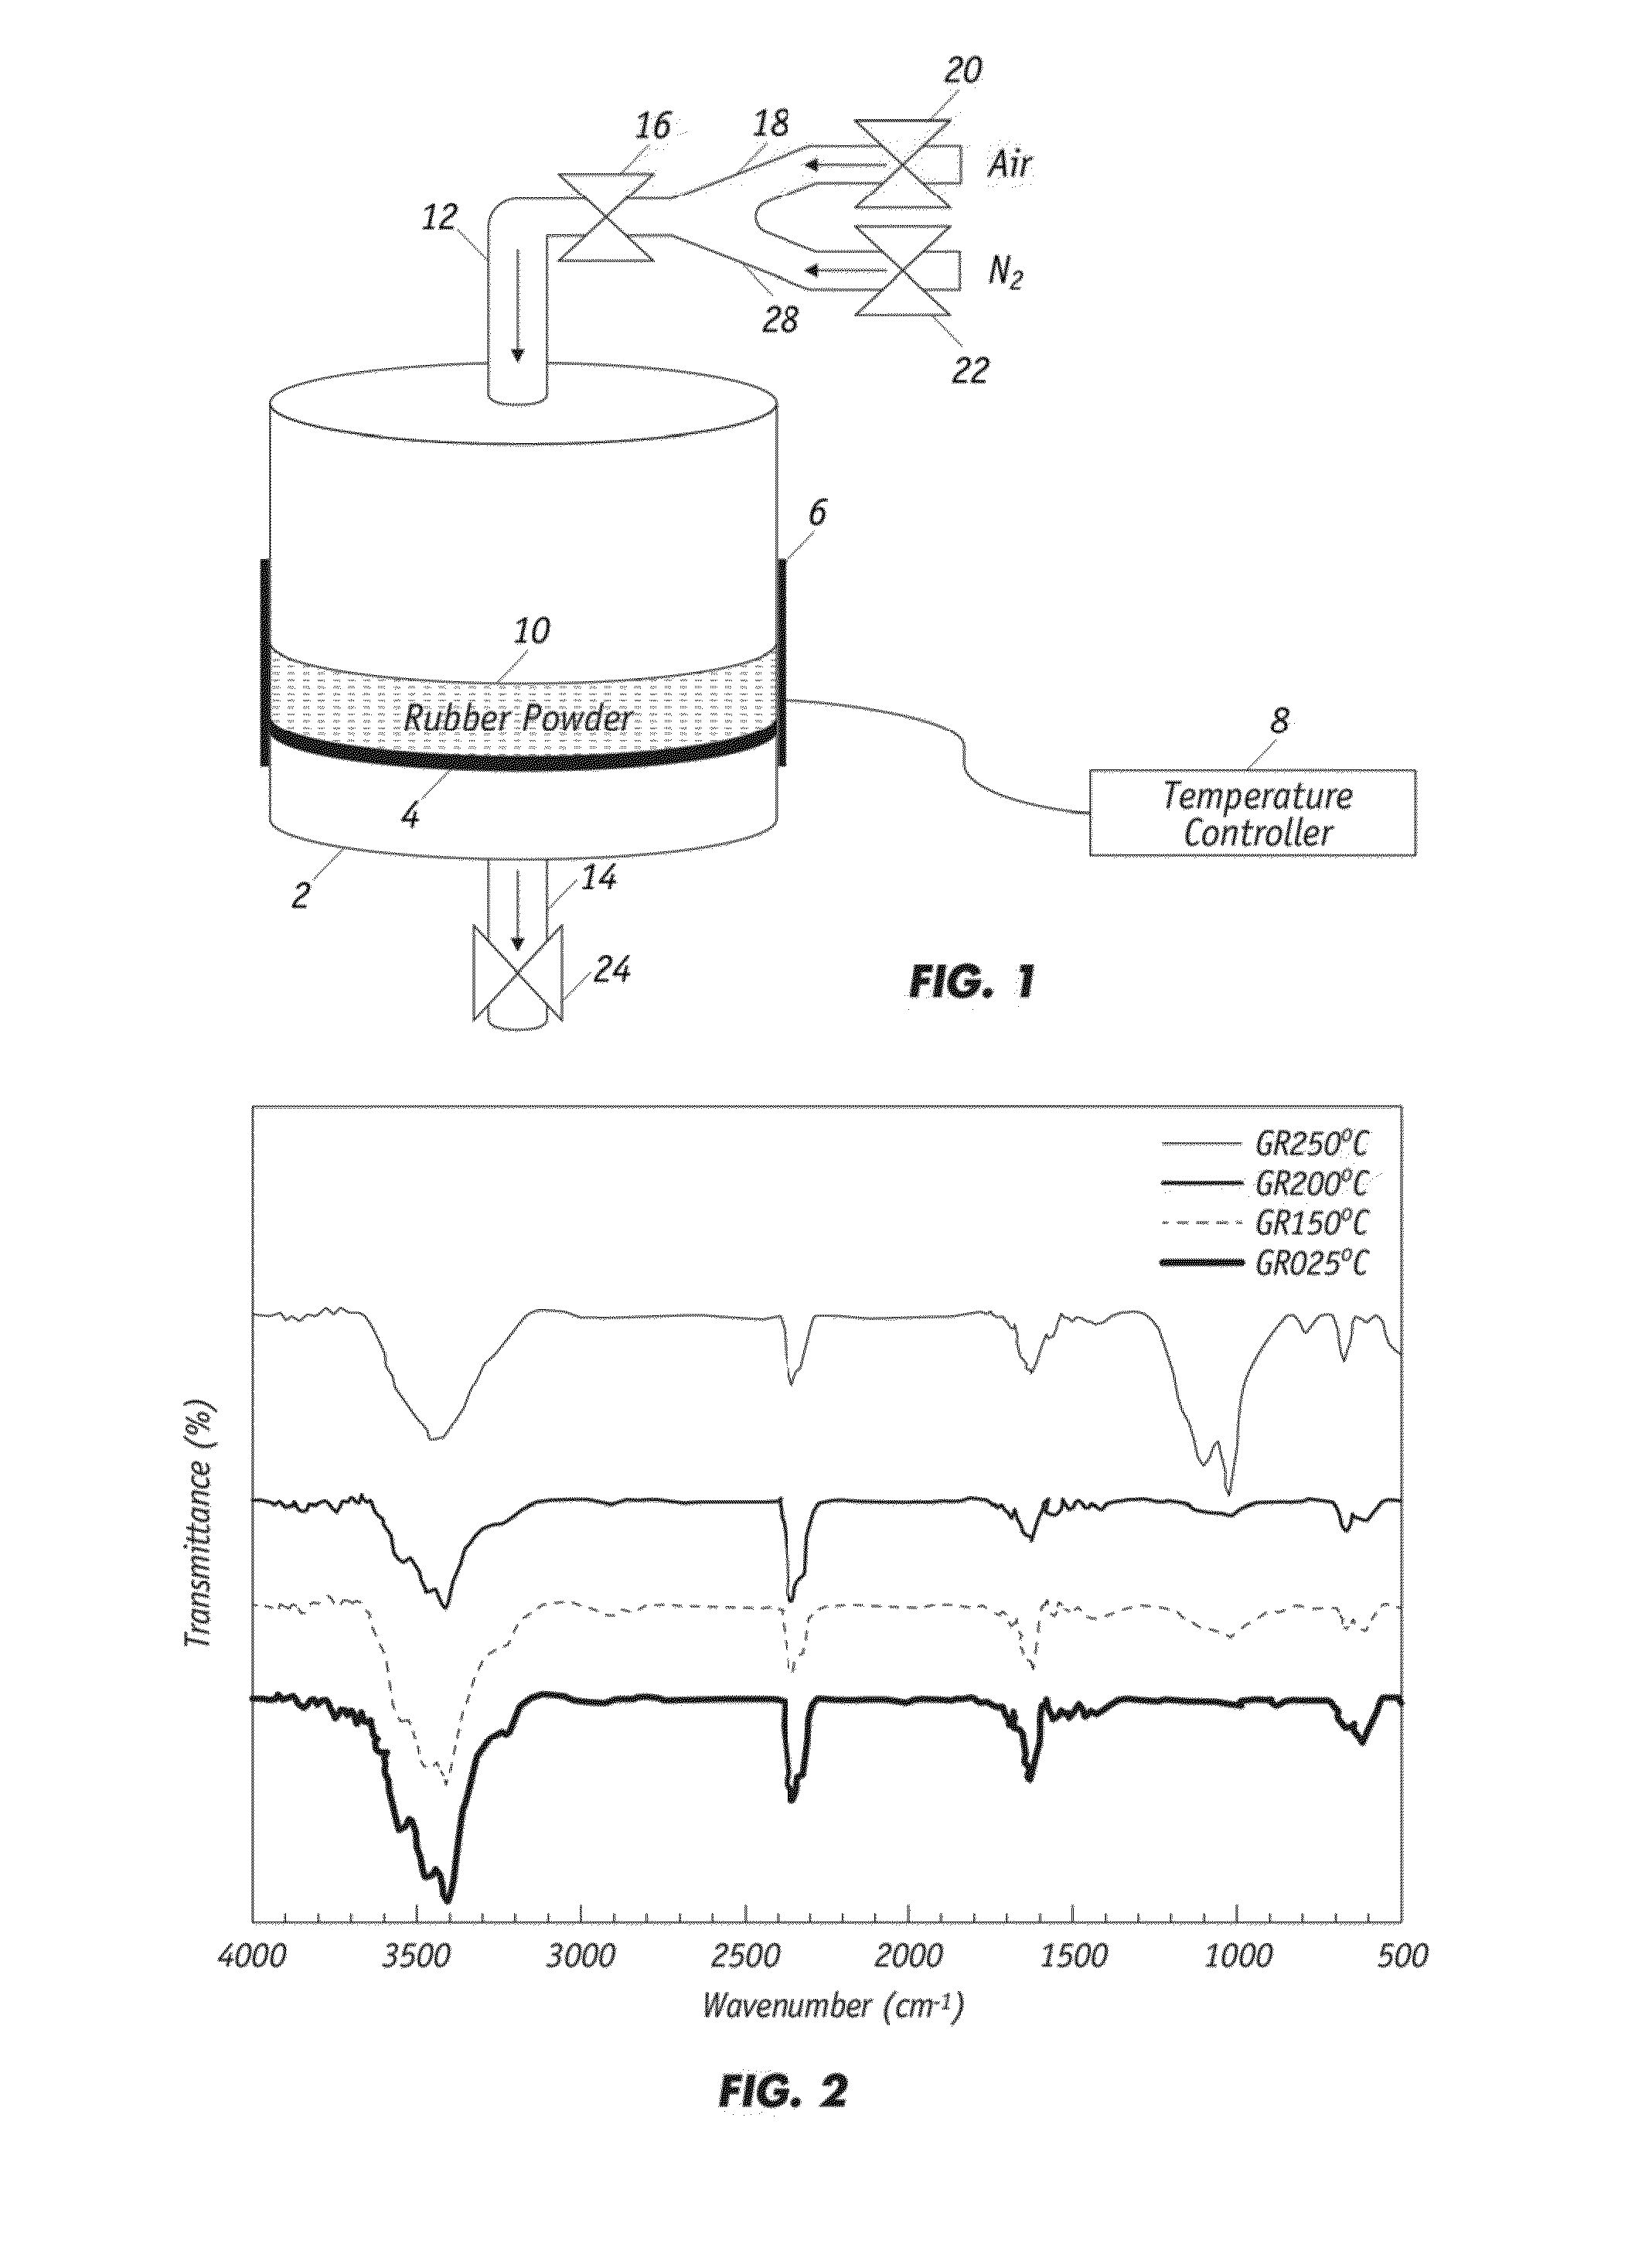 Method for producing improved rubberized concrete using waste rubber tires